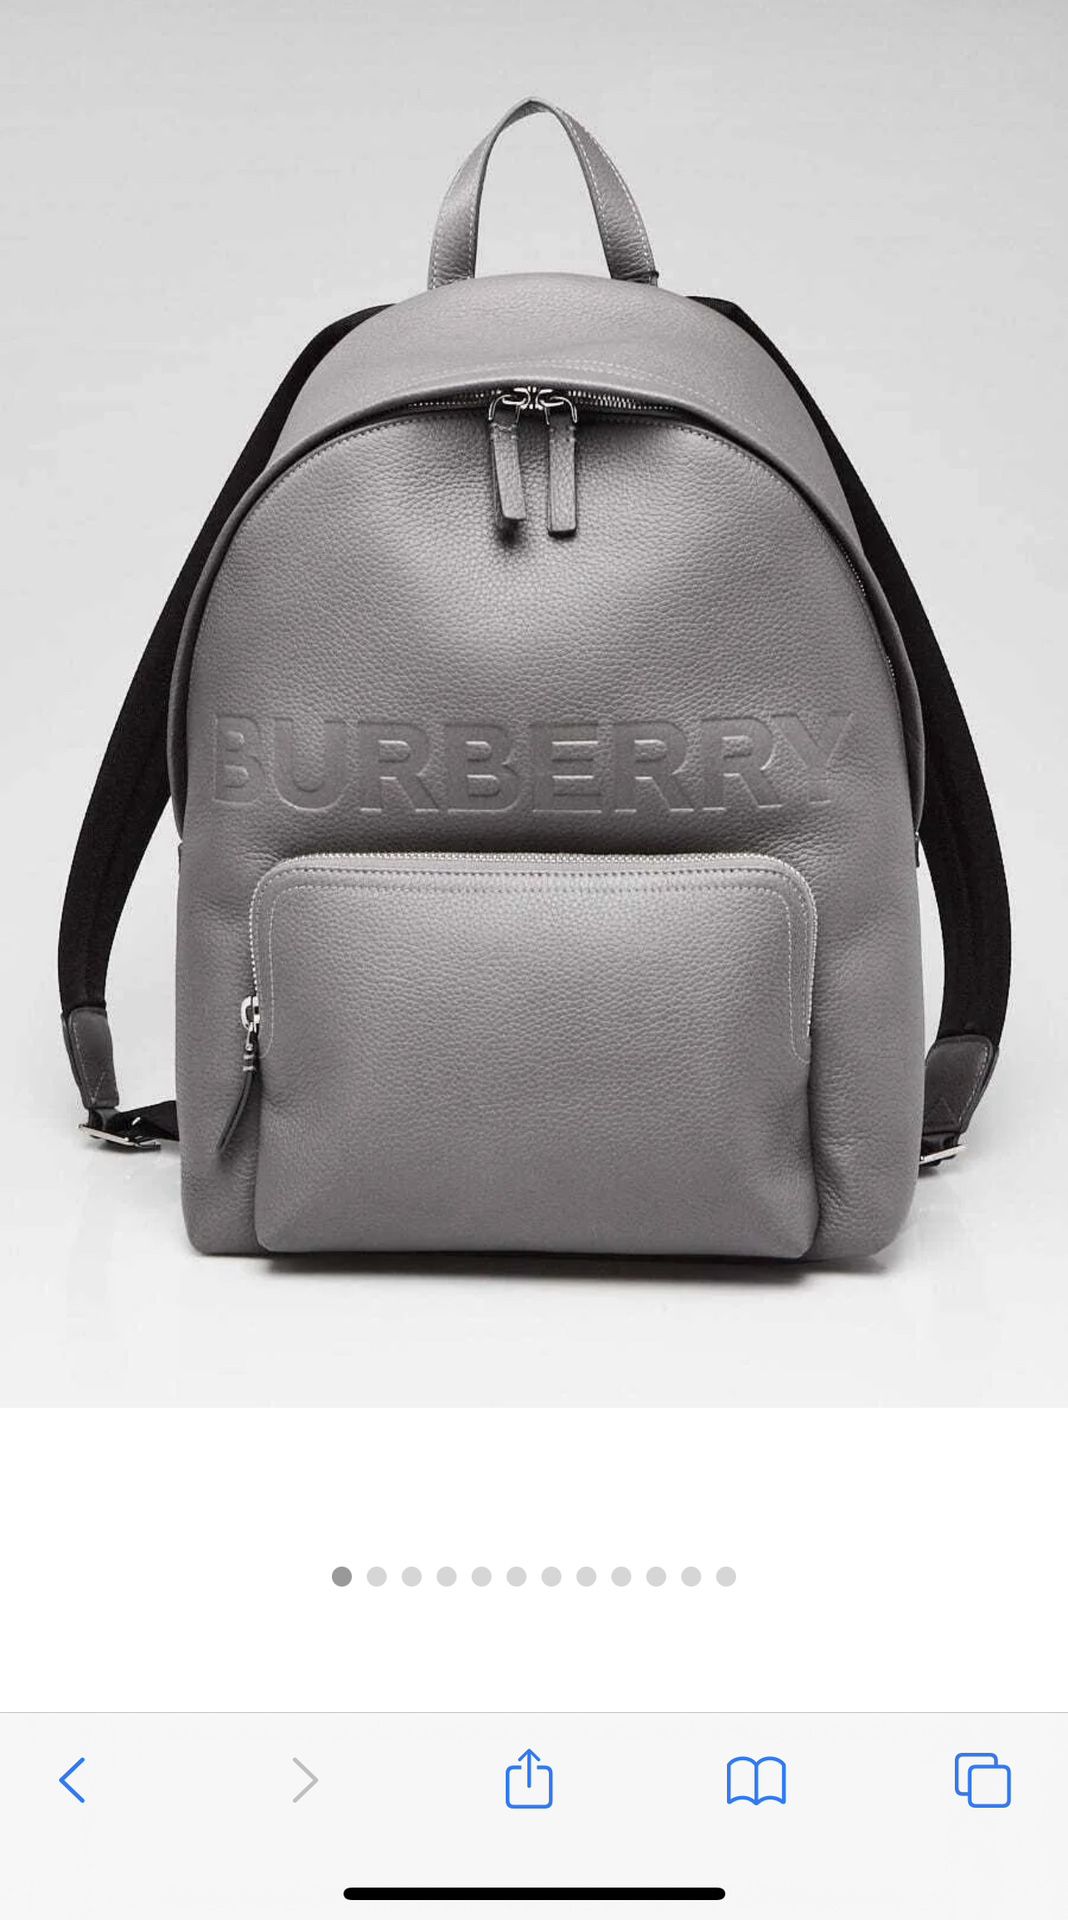 Burberry Abbeydale Leather Logo Backpack Charcoal Grey Brand New With Tags